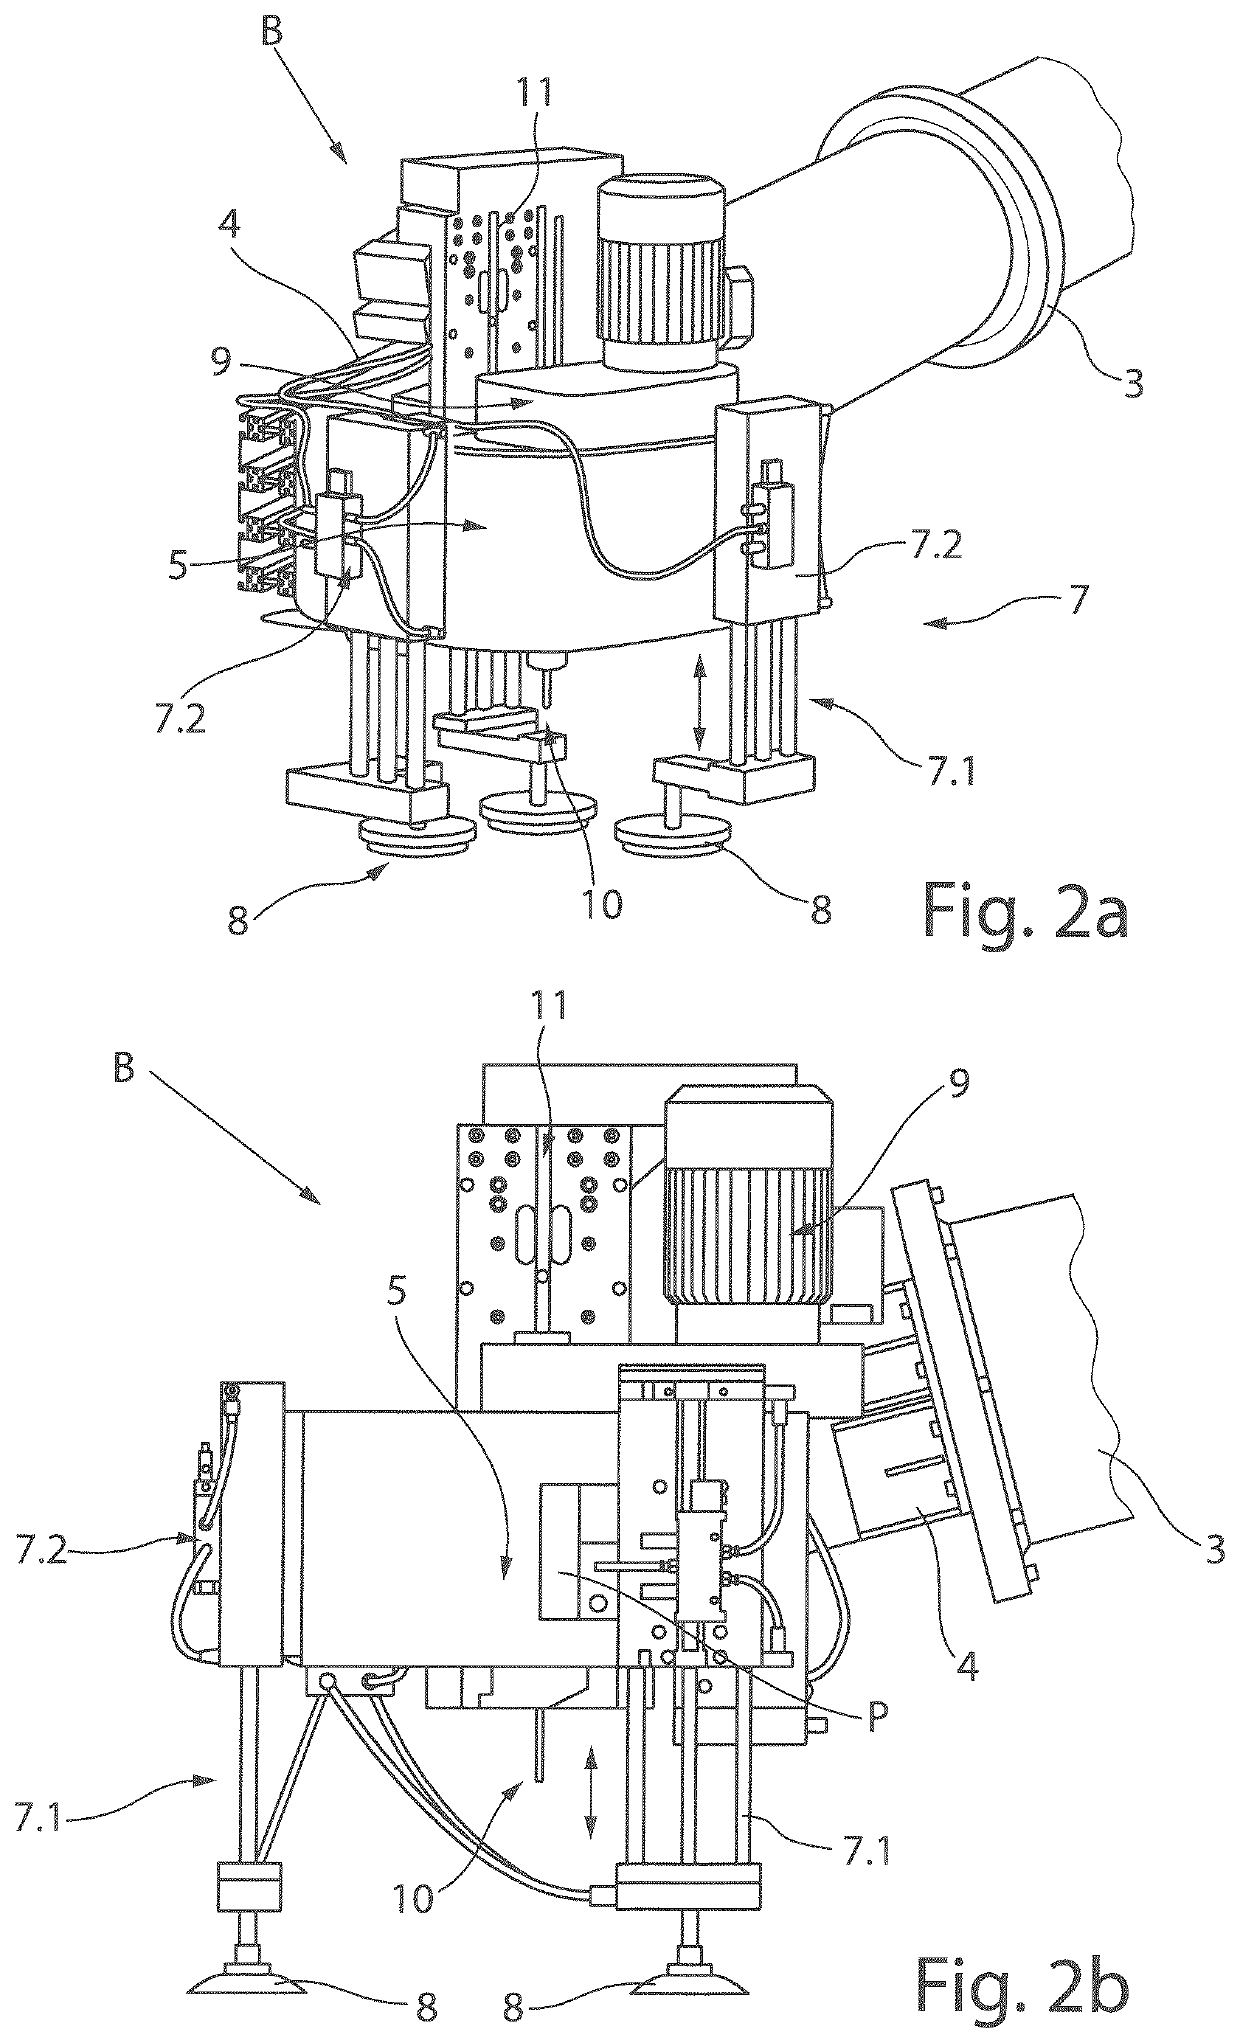 Method and arrangement of introducing boreholes into a surface of a workpiece mounted in a stationary manner using a boring tool attached to an articulated-arm robot